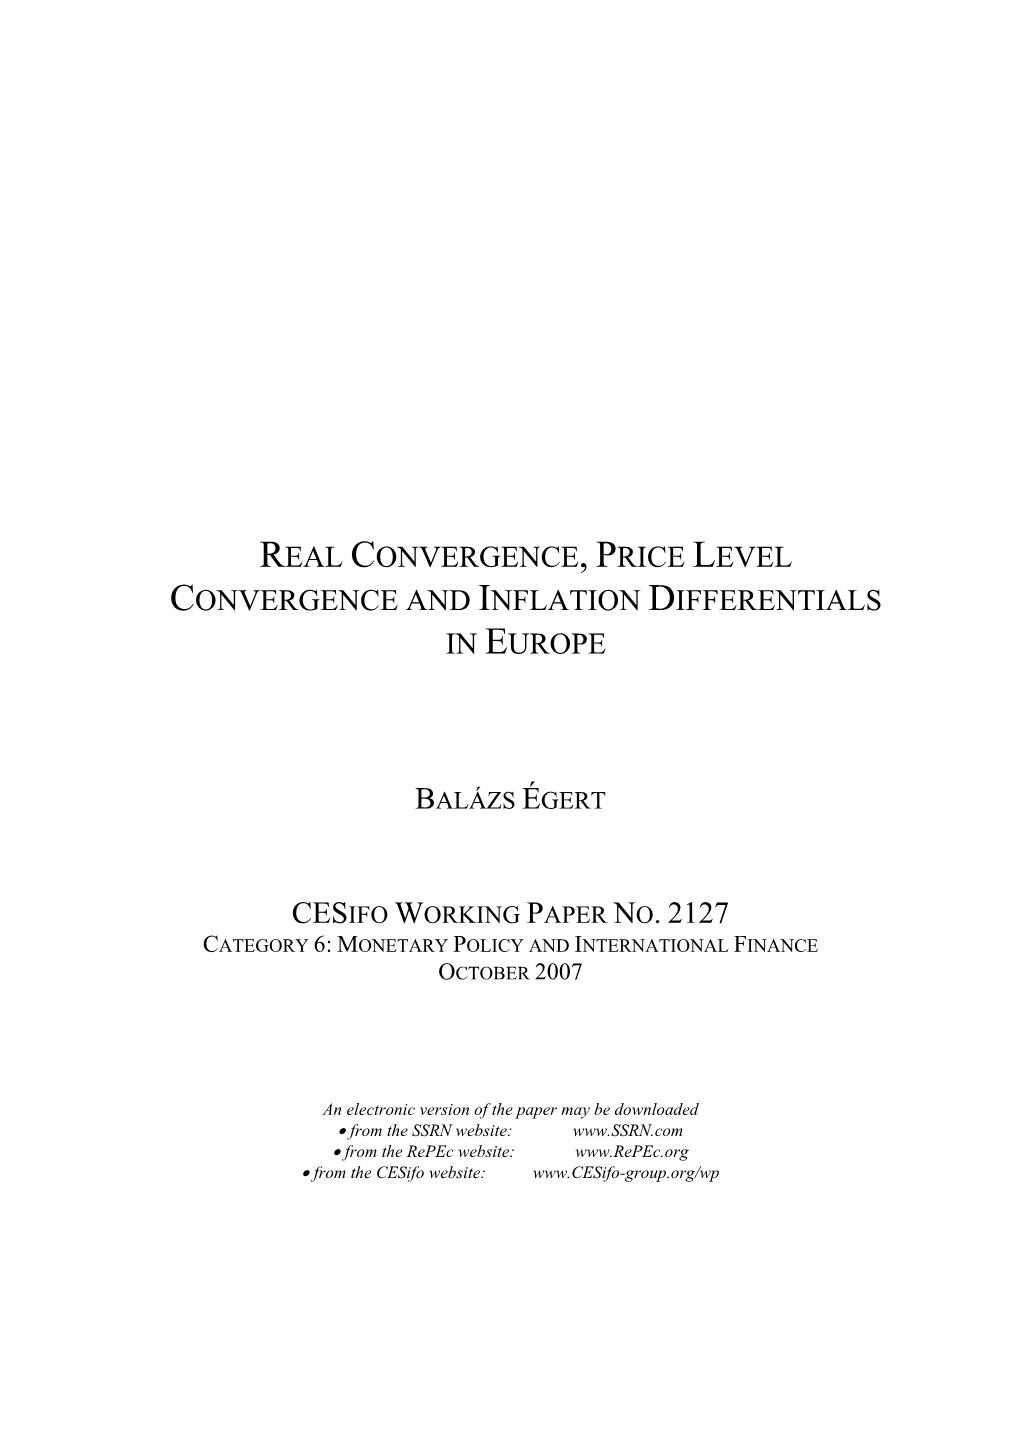 Real Convergence, Price Level Convergence and Inflation Differentials in Europe